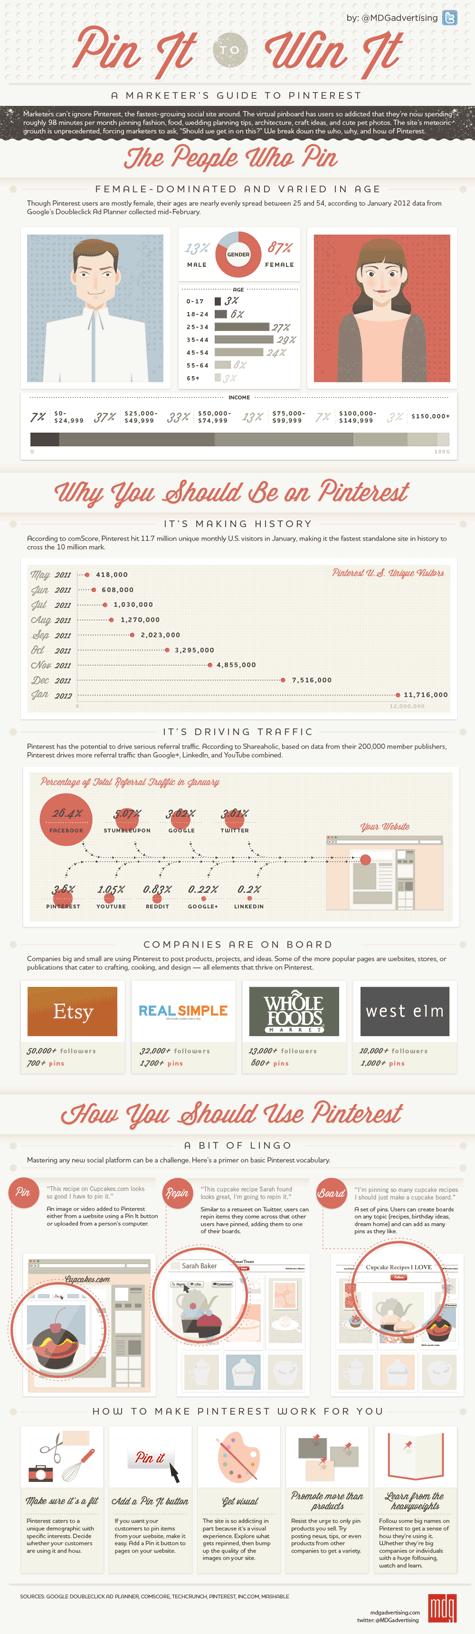 Marketers Guide to Pinterest Infographic